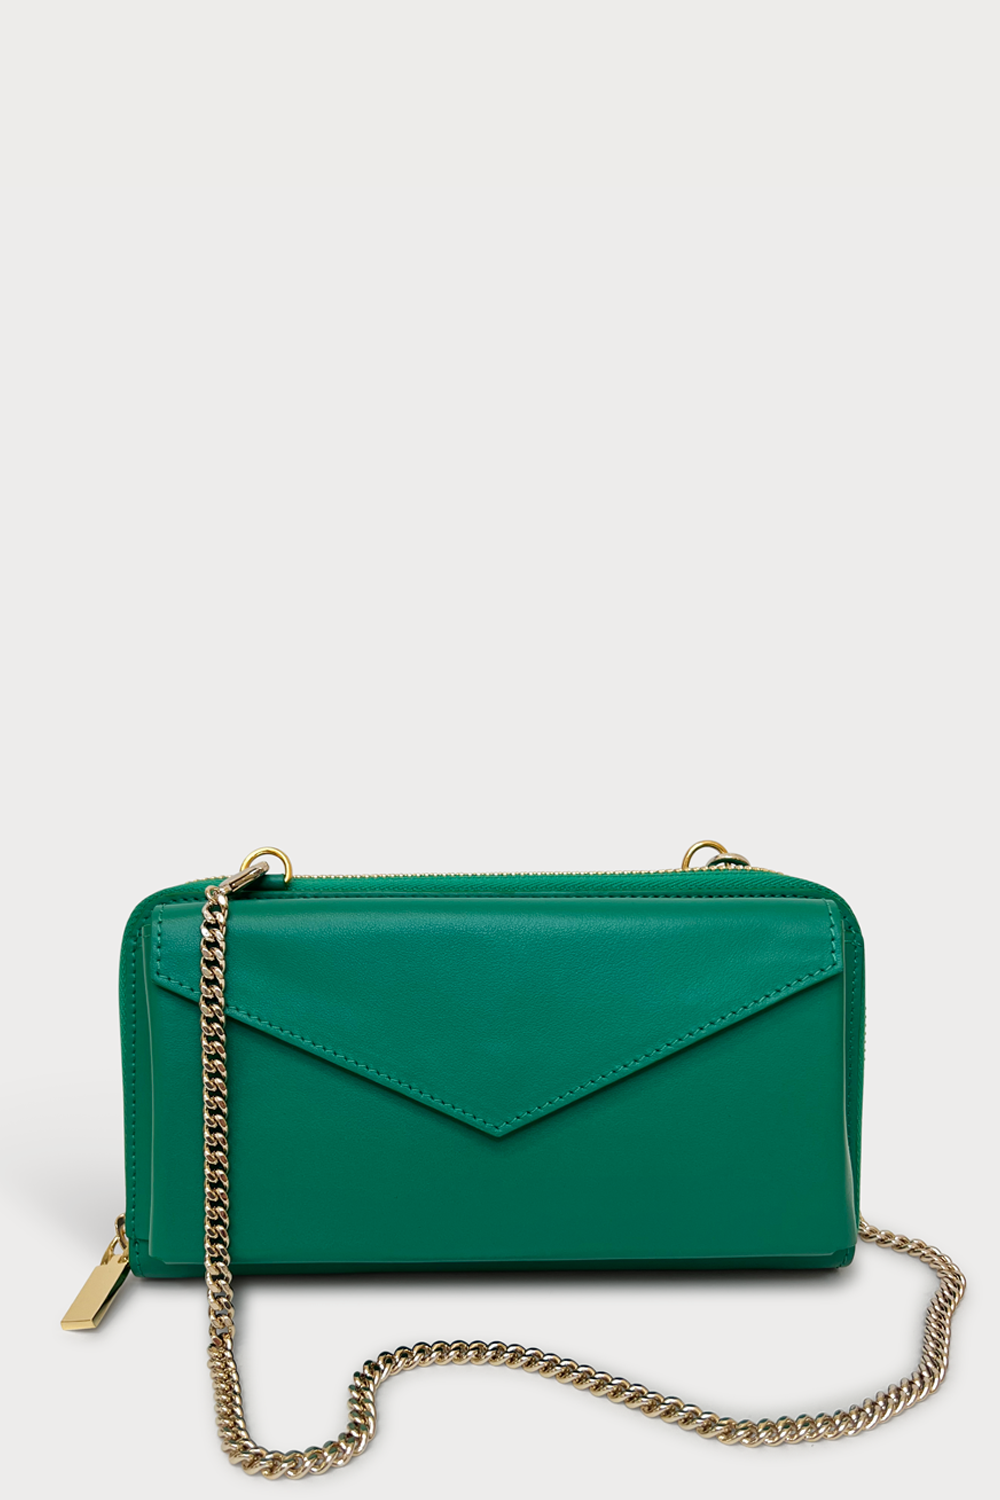 Mel Boteri | 'Himani' Wallet Clutch Bag With Detachable Cross-Body Strap | emerald leather | Front View